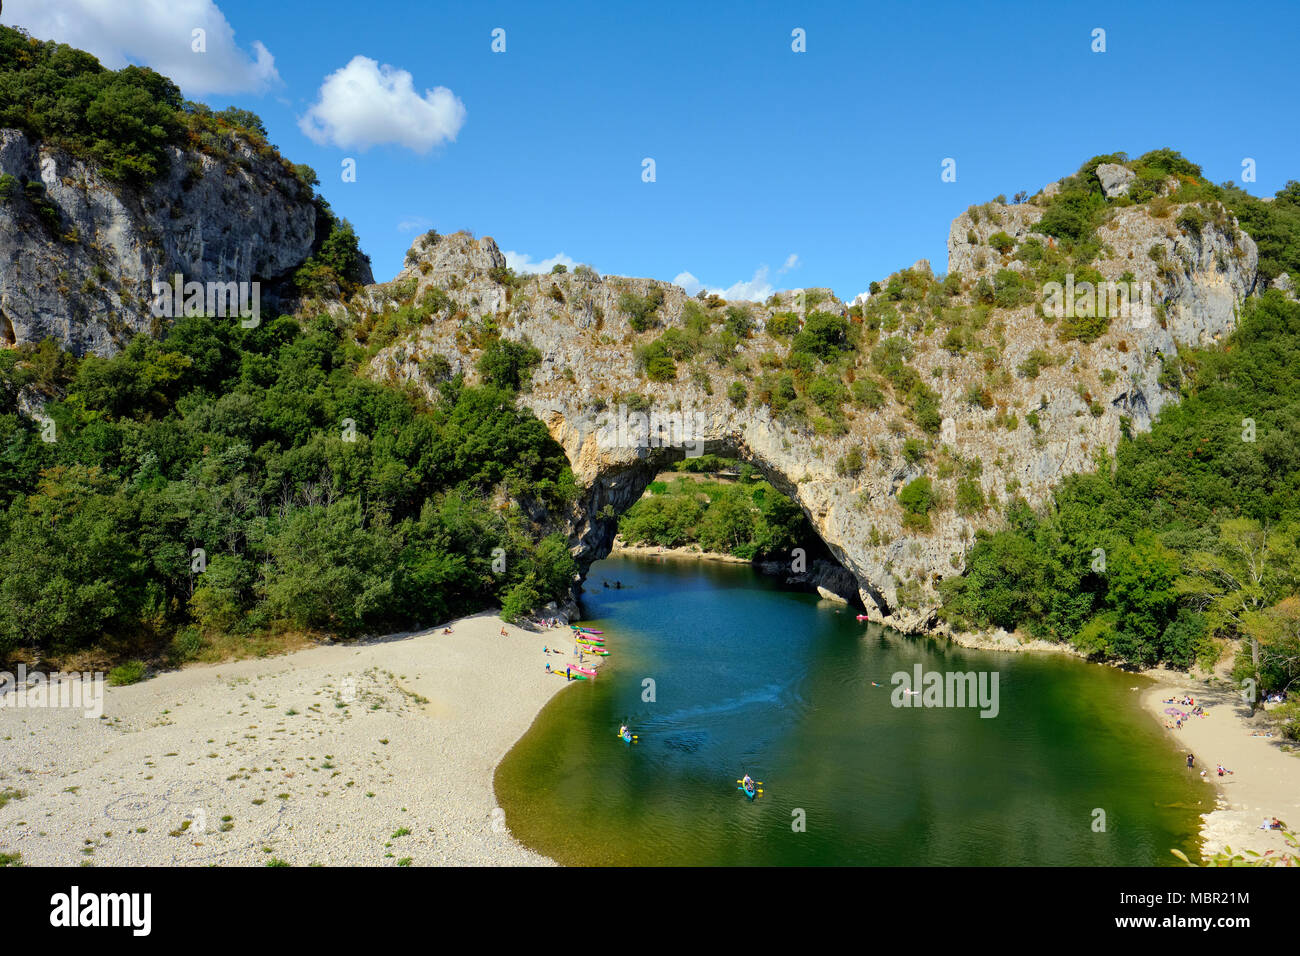 The natural stone arch of Pont d'Arc in the Gorges de l'Ardeche in southern France. Stock Photo